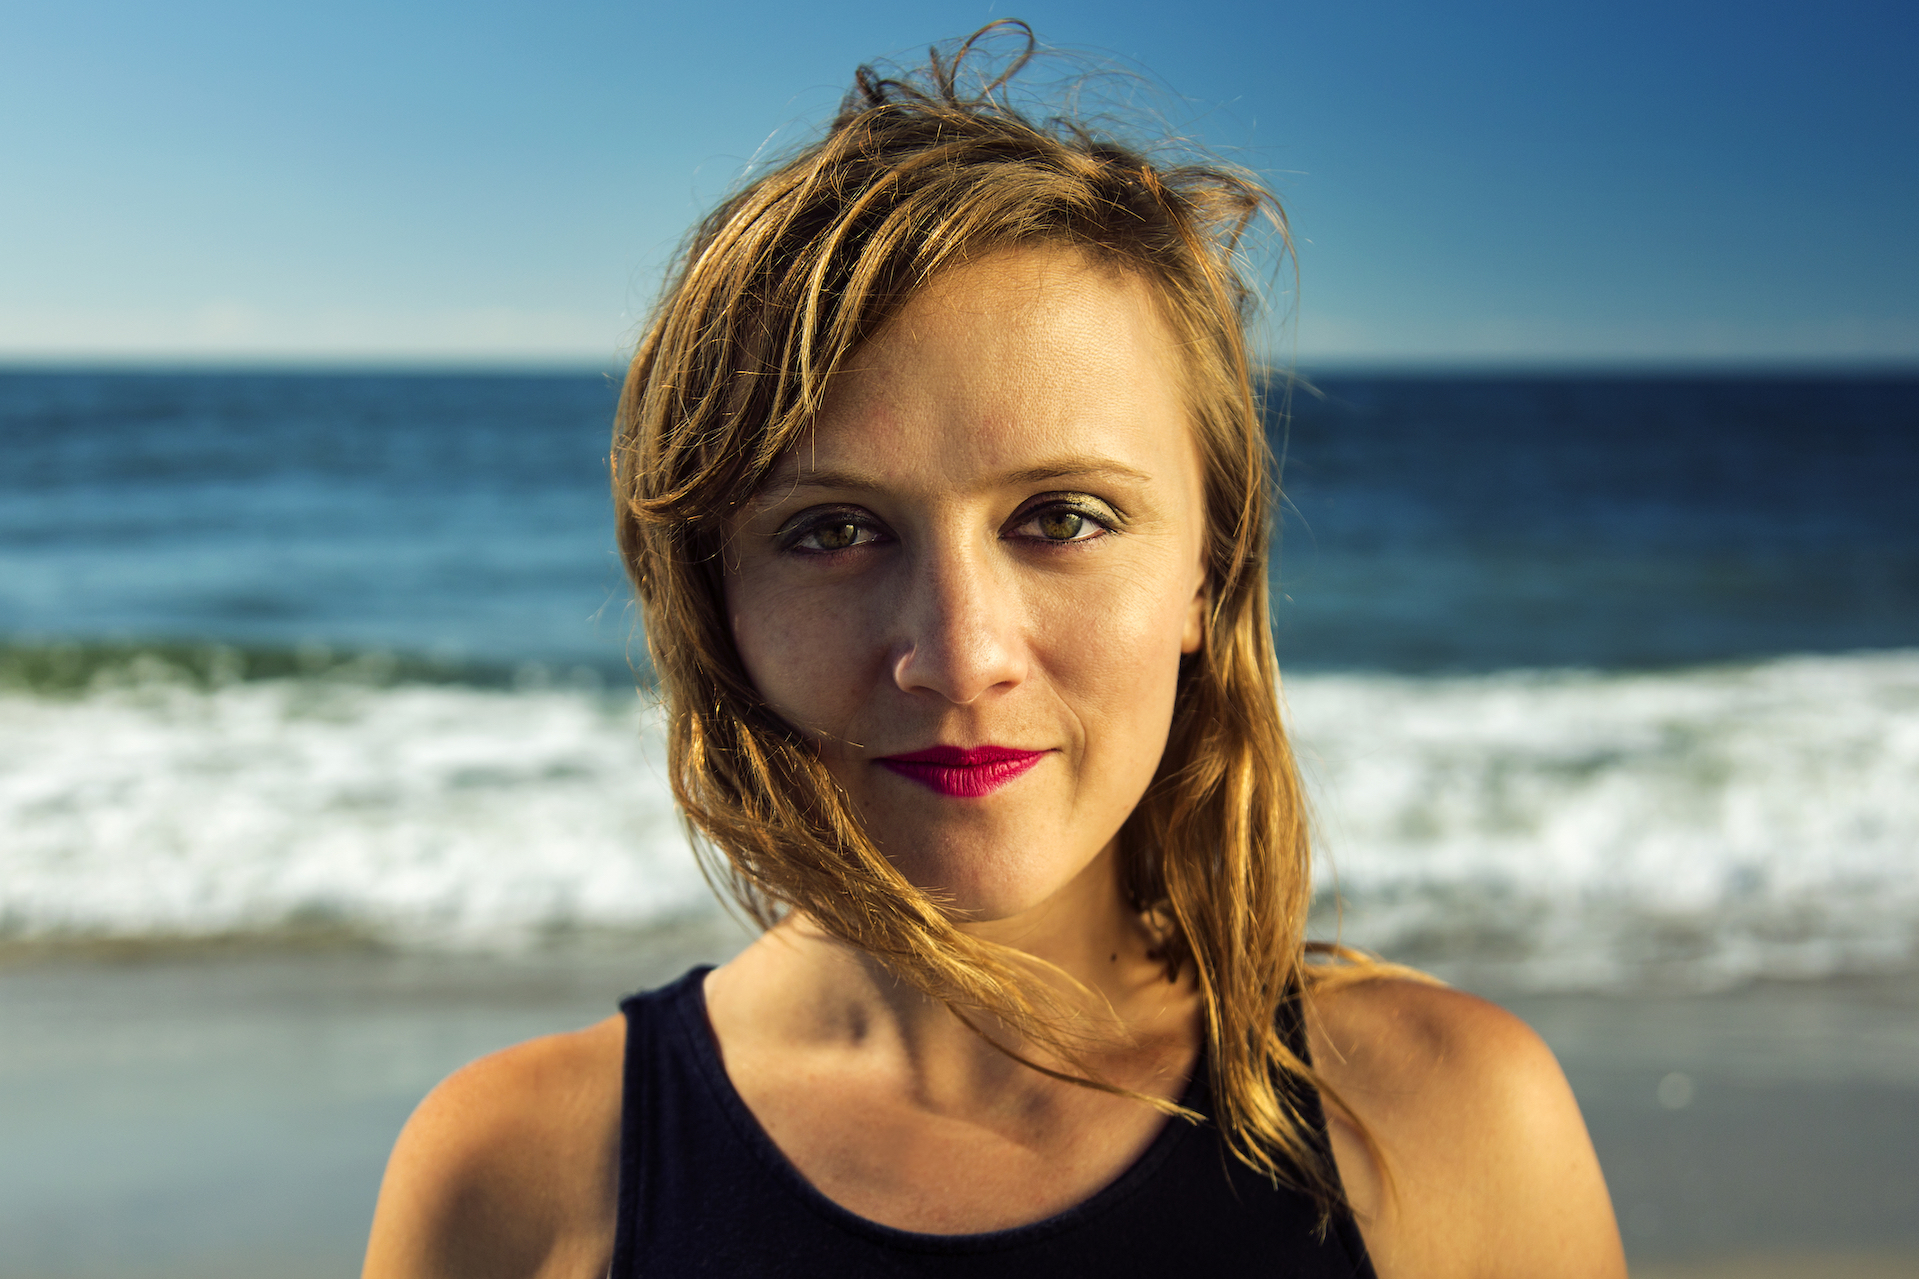 Headshot of a woman looking directly at the camera on a beach with shoreline and sea in the background.